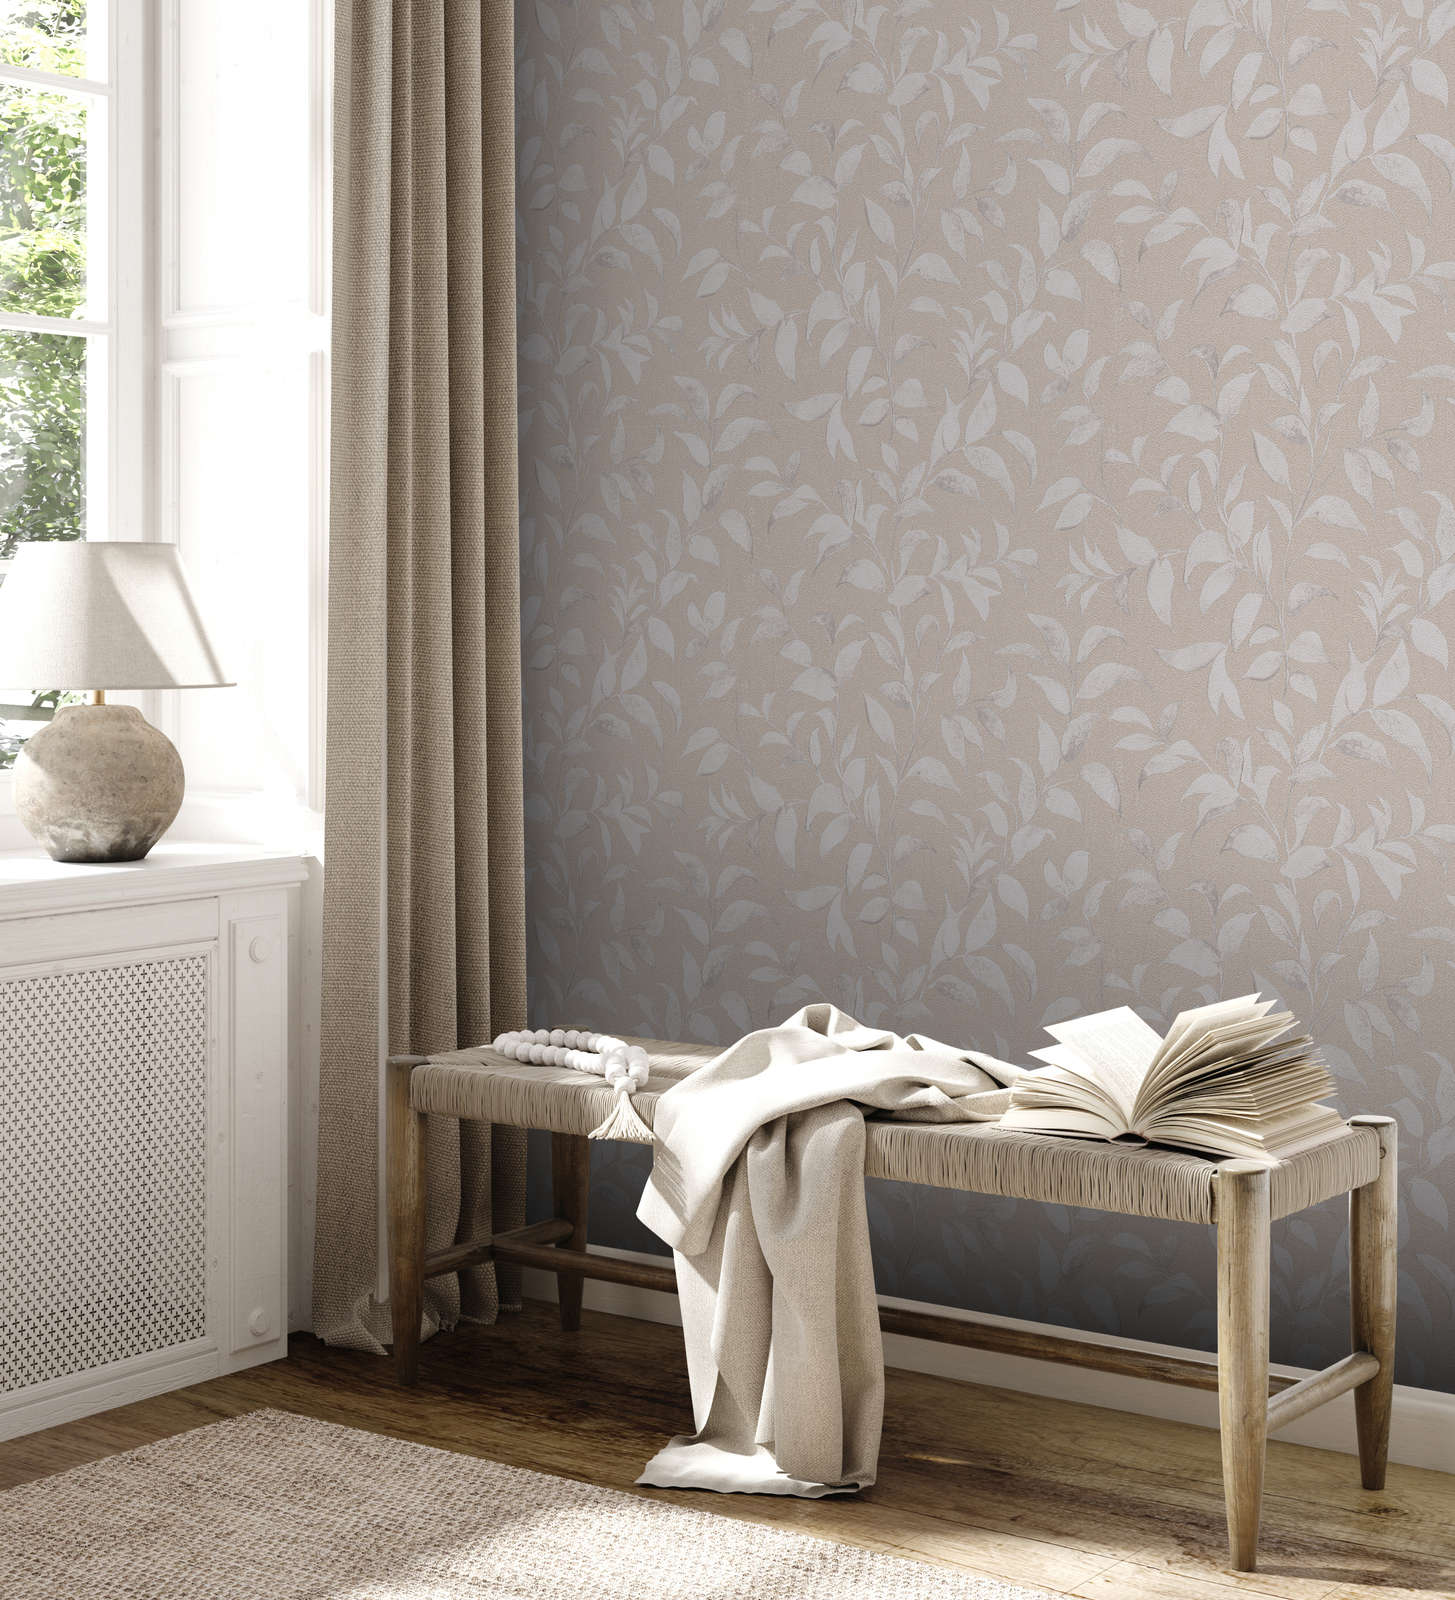             Floral leaves wallpaper shimmering textured - grey, silver
        